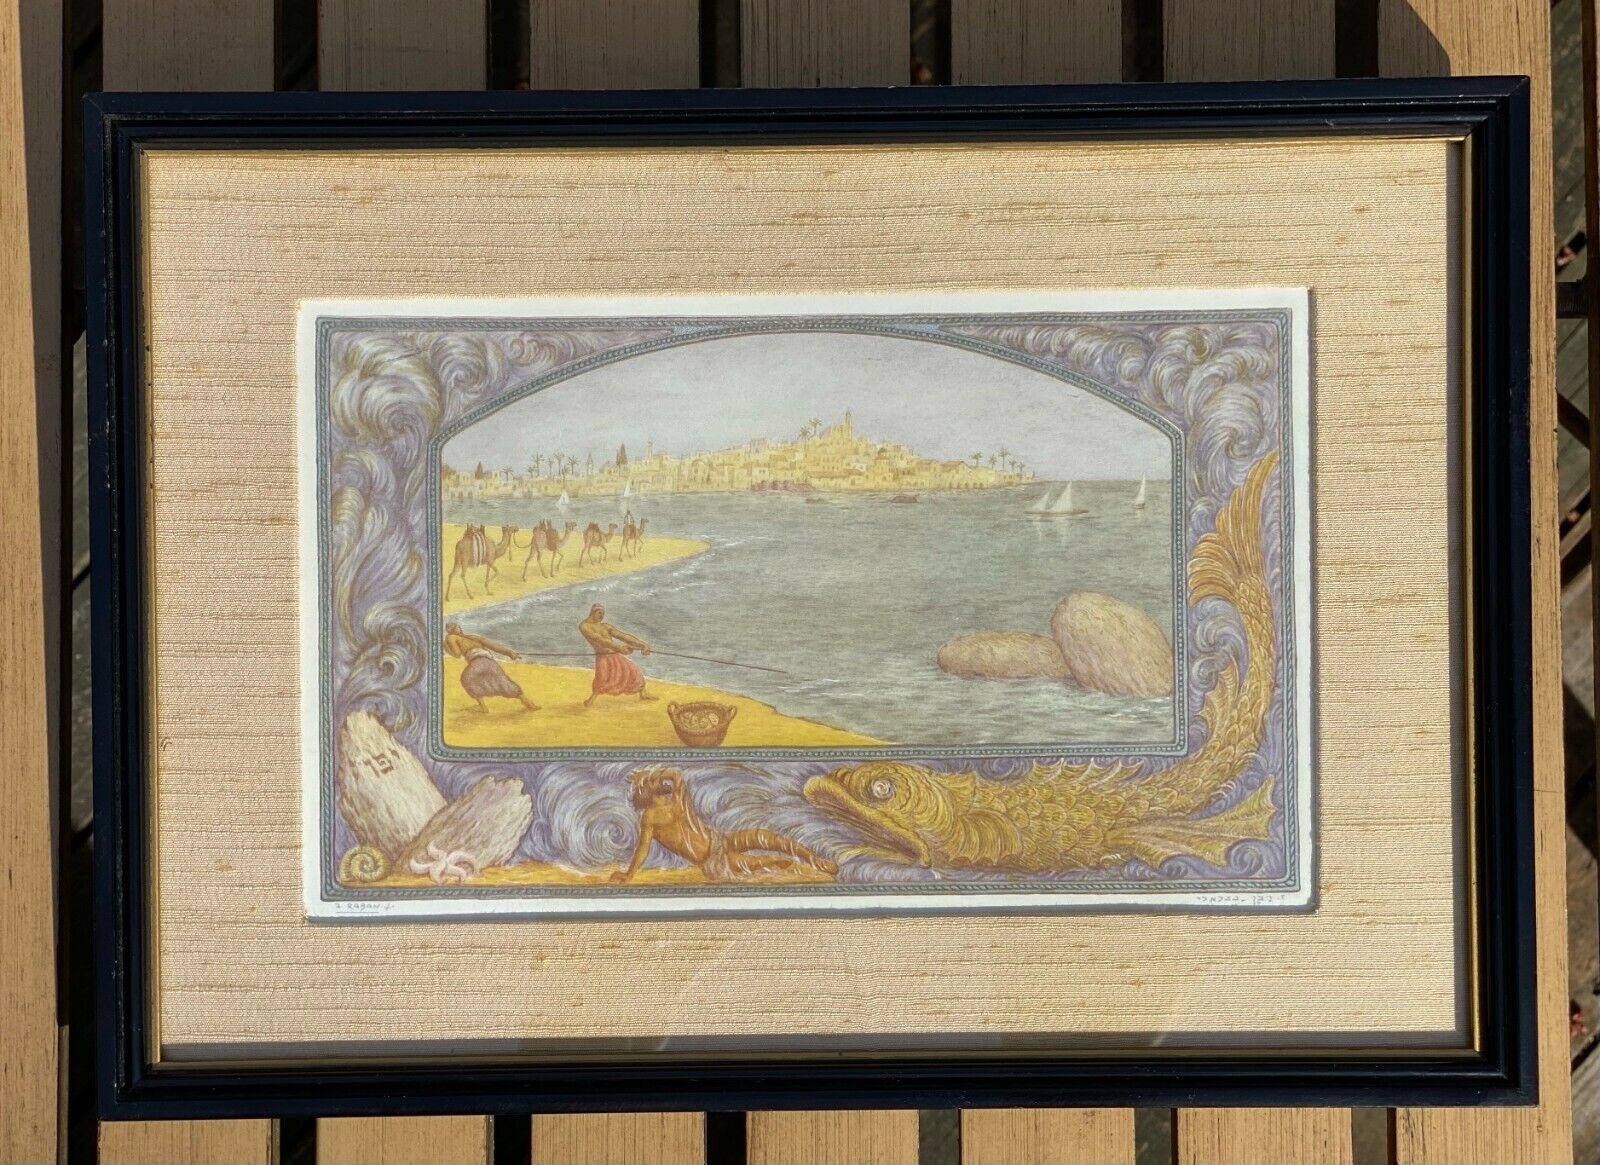 Ze’ev Raban - Jaffa - 1950s chromolithograph - beautifully framed and matted